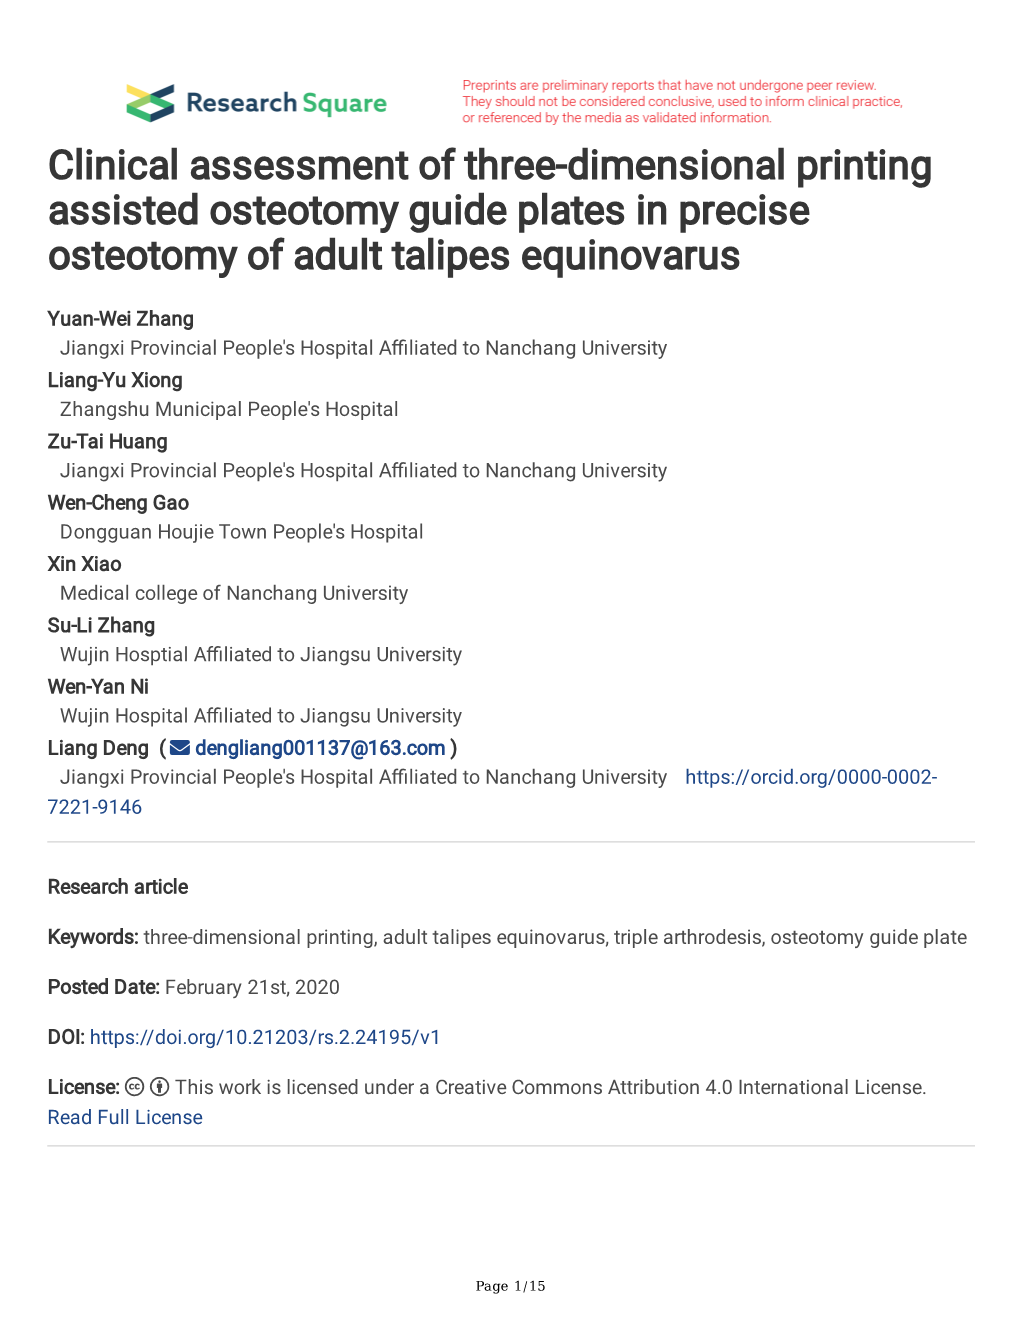 Clinical Assessment of Three-Dimensional Printing Assisted Osteotomy Guide Plates in Precise Osteotomy of Adult Talipes Equinovarus